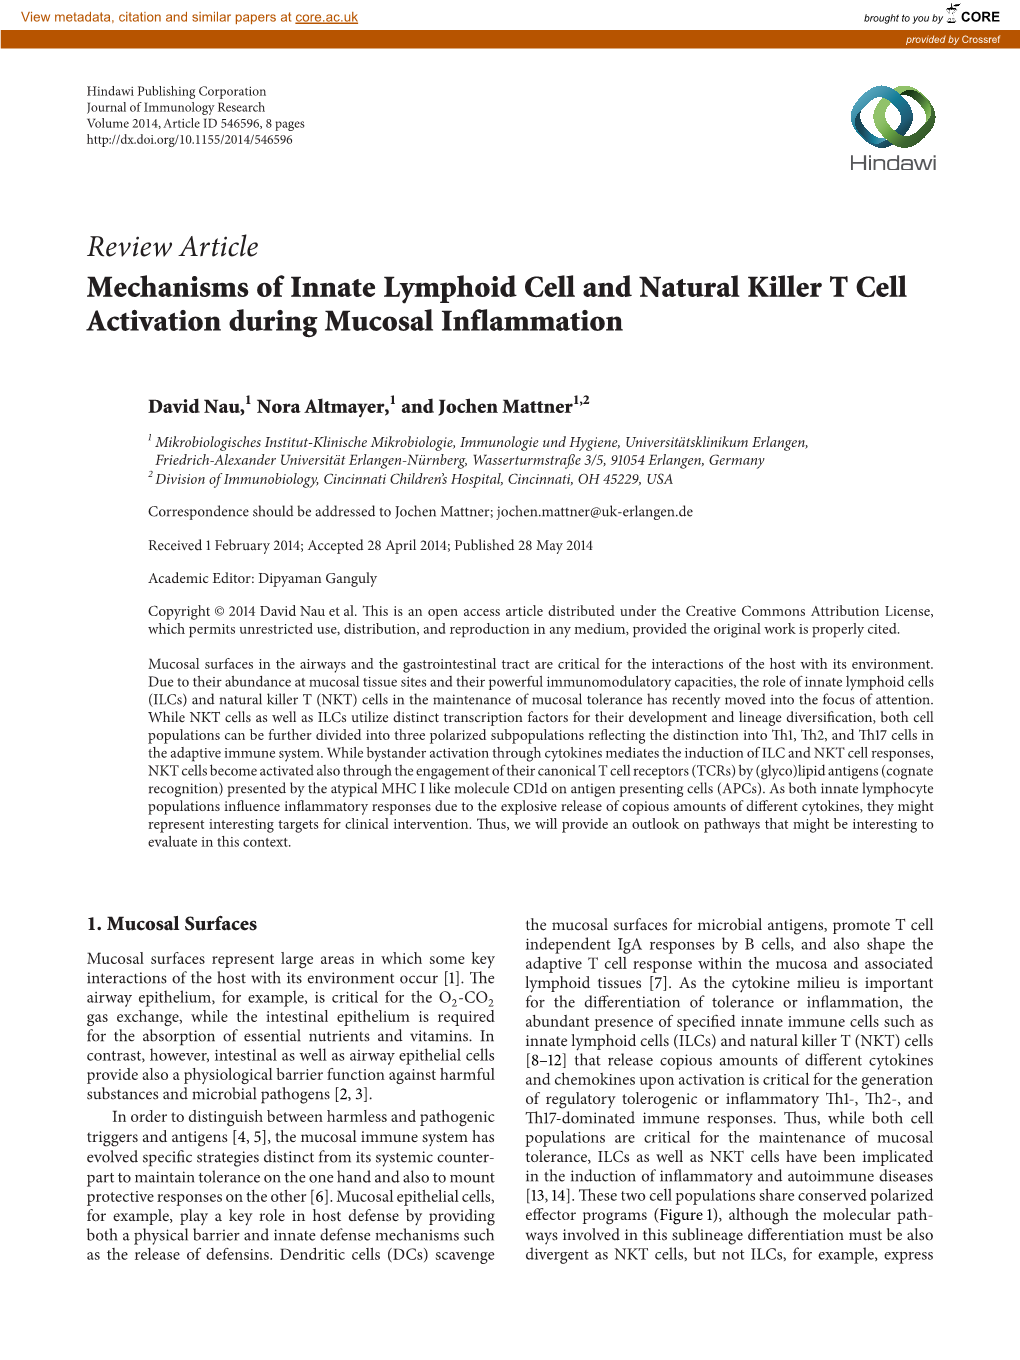 Review Article Mechanisms of Innate Lymphoid Cell and Natural Killer T Cell Activation During Mucosal Inflammation